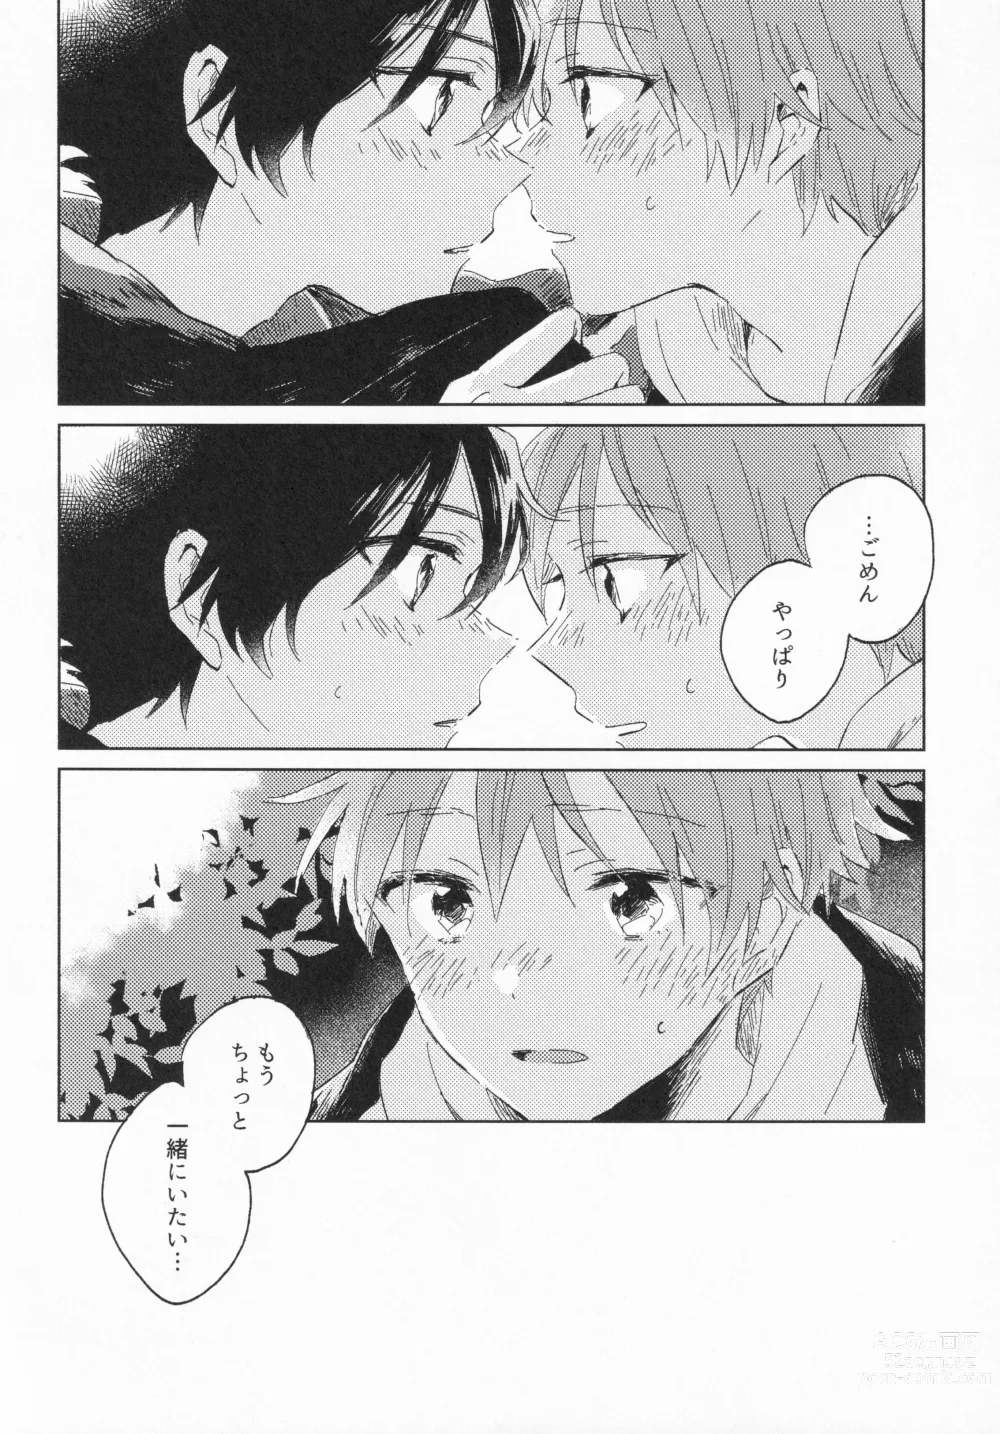 Page 37 of doujinshi 21-ji ni Machiawase - On the stroke of 9pm, the spell will be broken